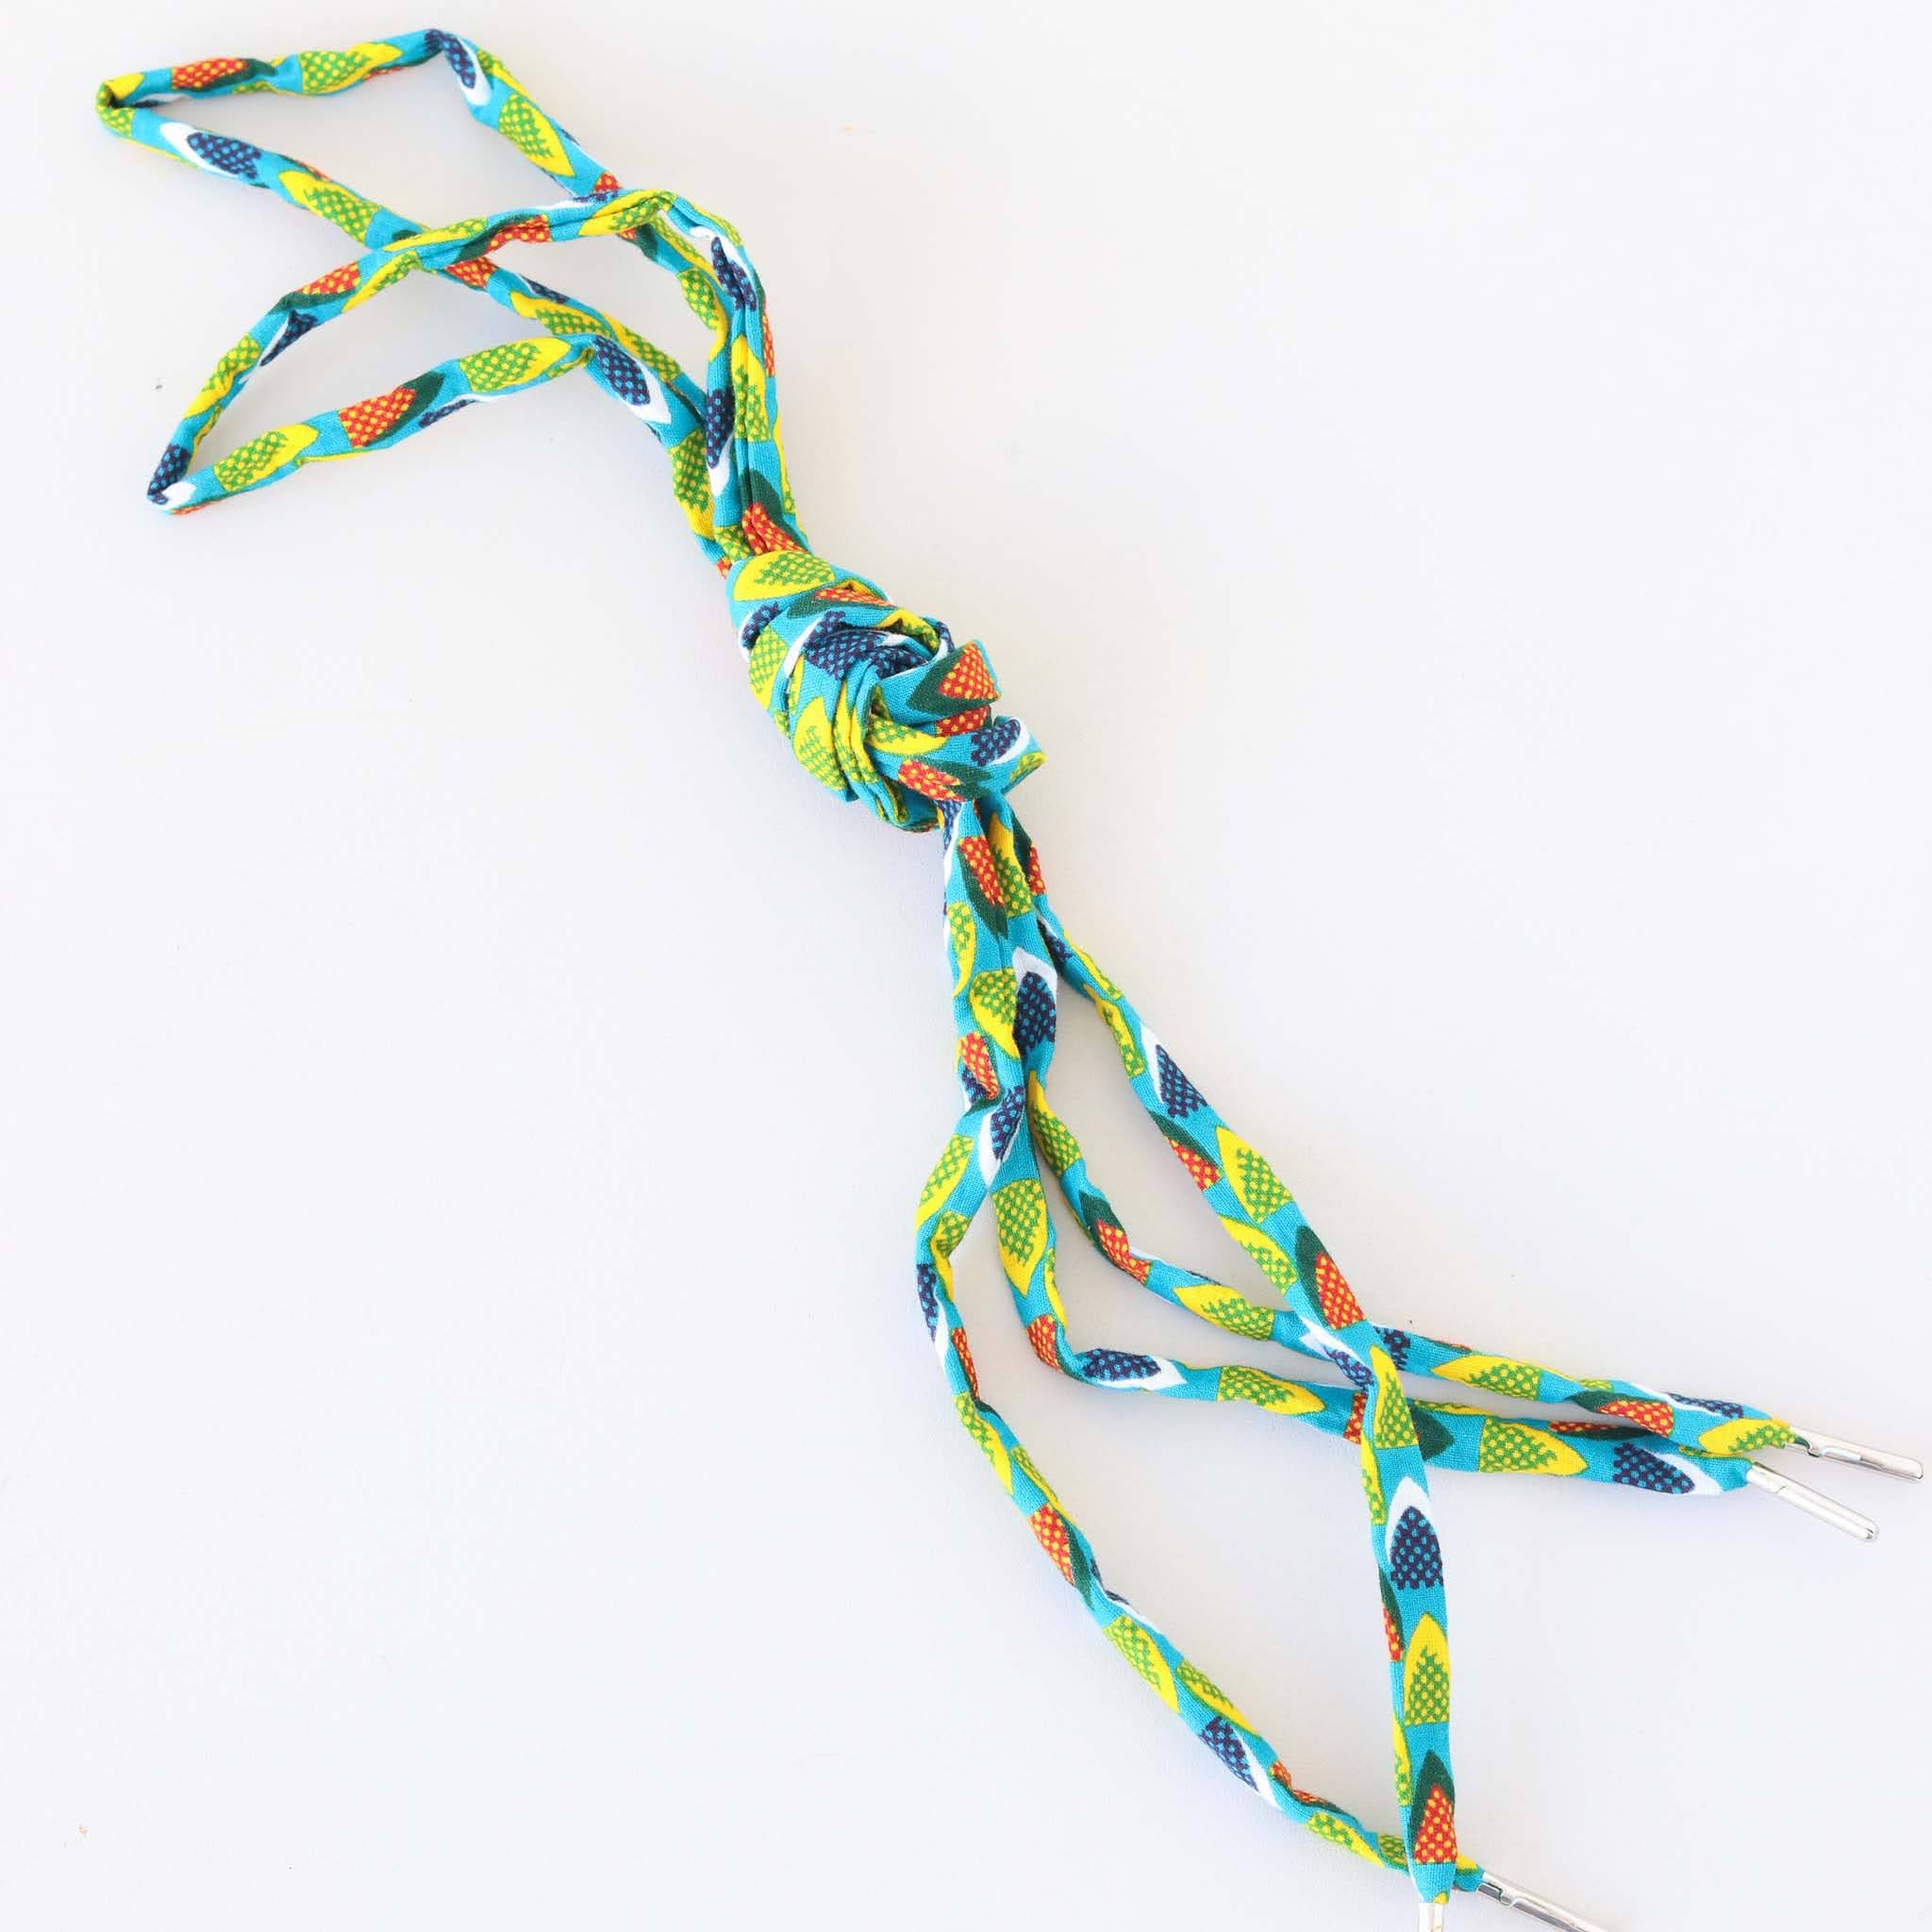 Liberian Shoelaces made for an African boutique